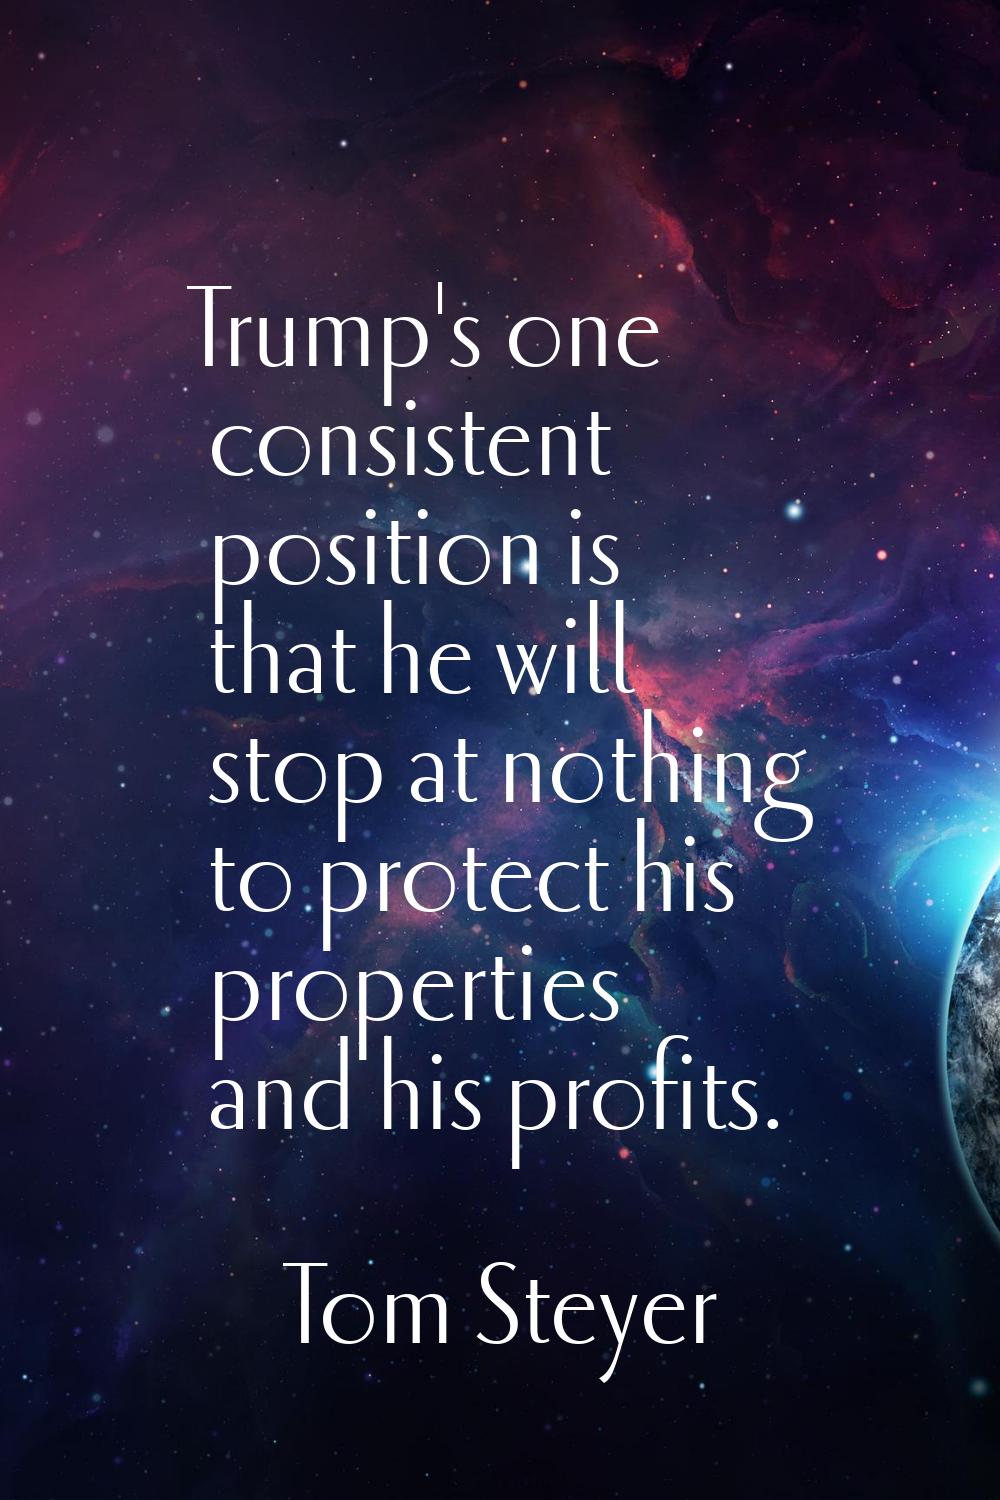 Trump's one consistent position is that he will stop at nothing to protect his properties and his p